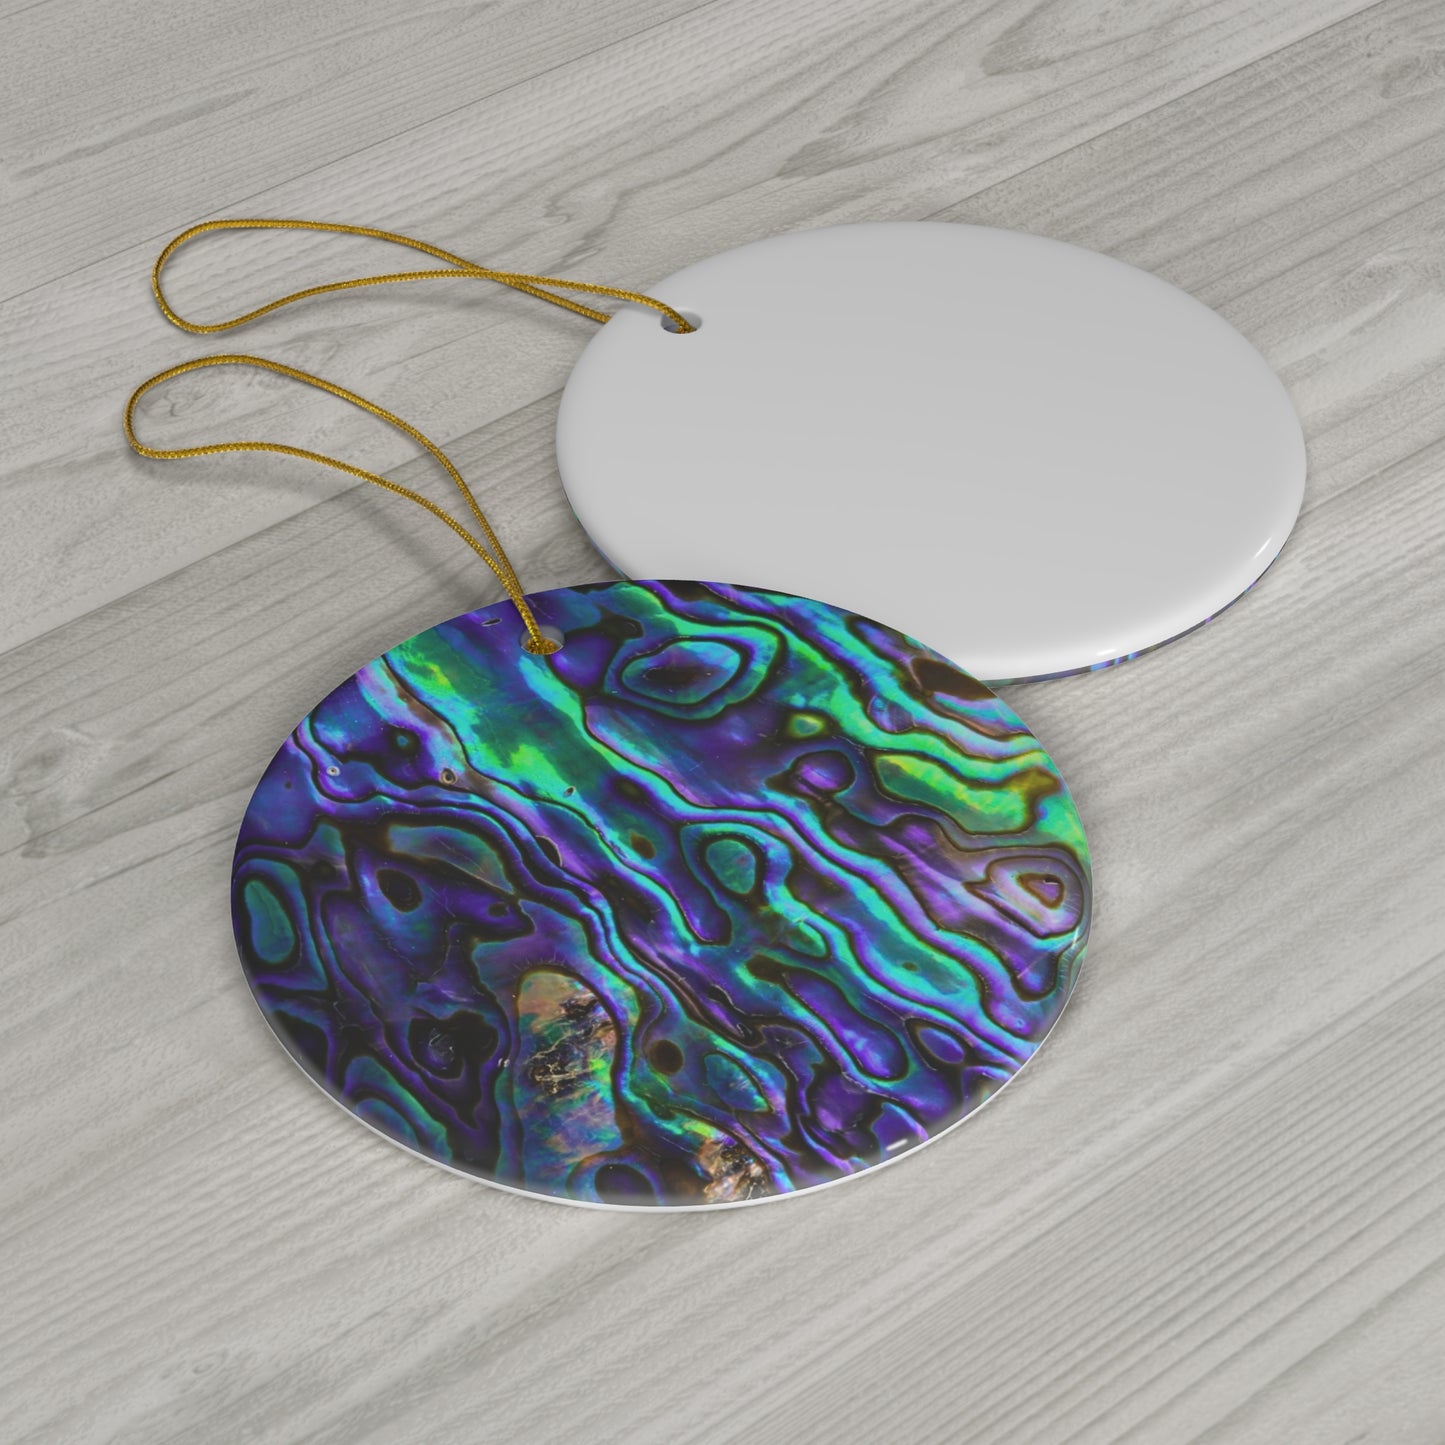 Abalone Jewels Natural Shell Ocean Abstract Ceramic Ornament